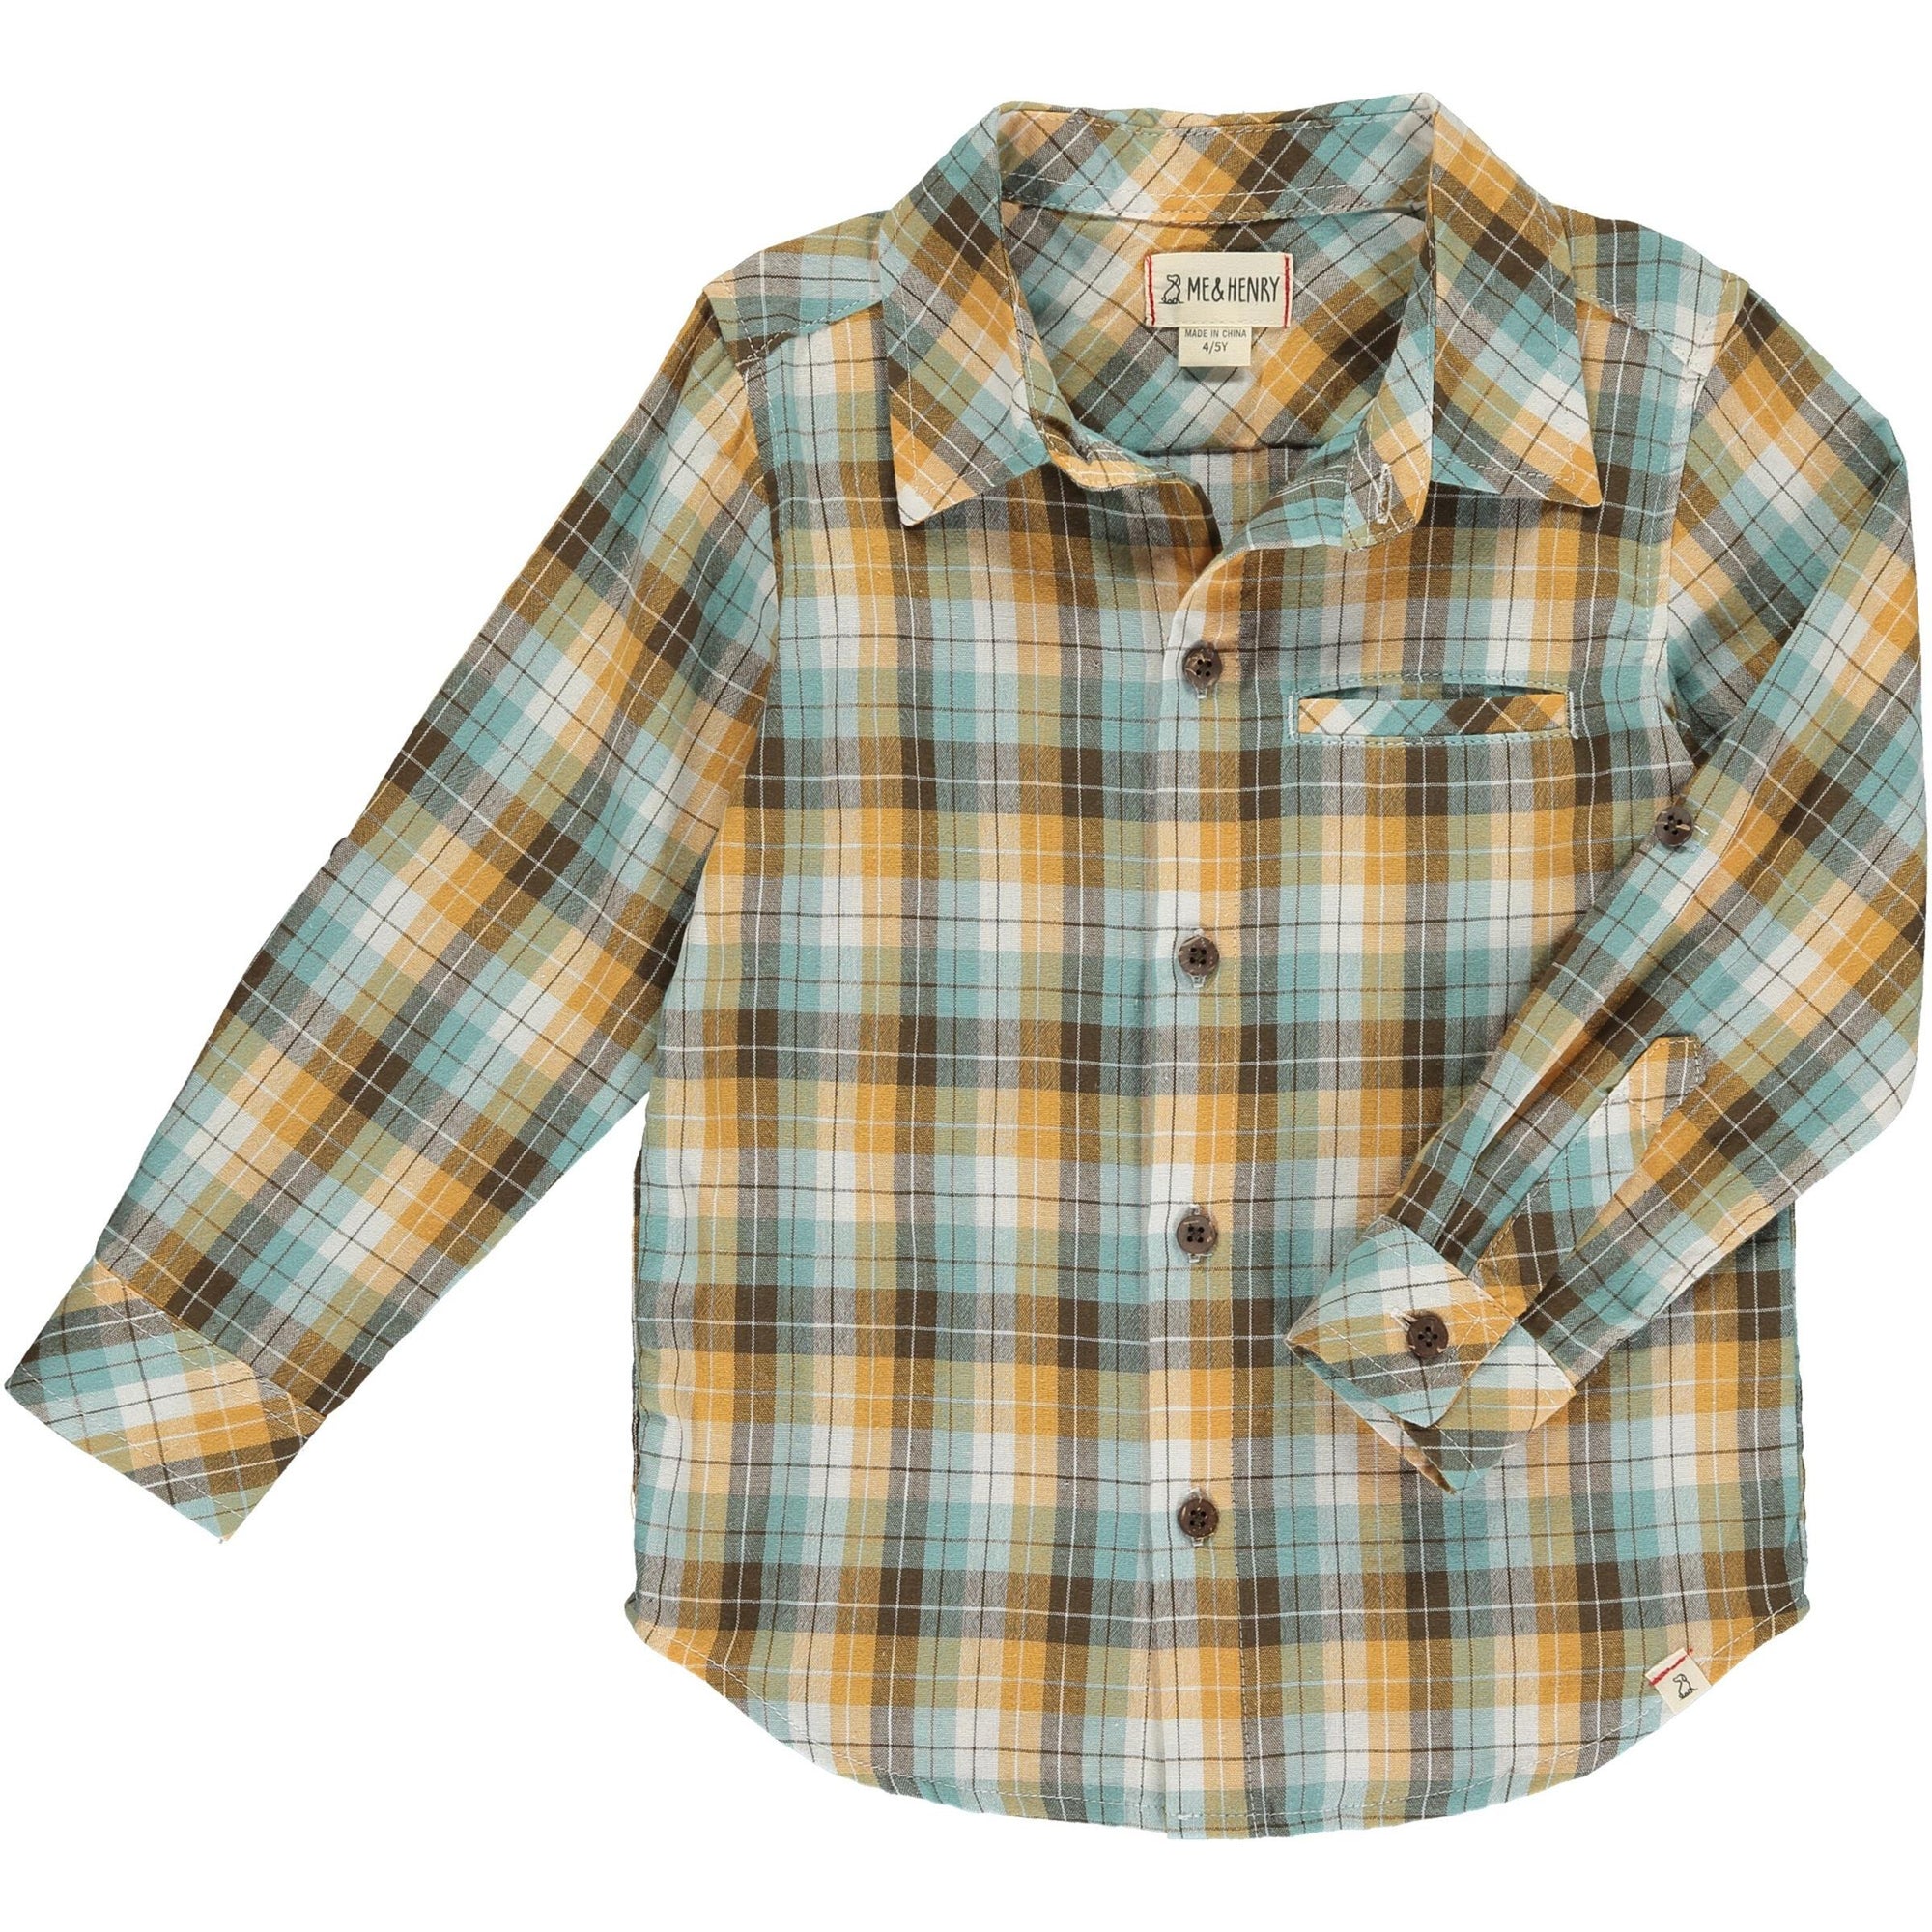 Me & Henry Atwood Woven Shirt / Tan, Brown & Blue Plaid